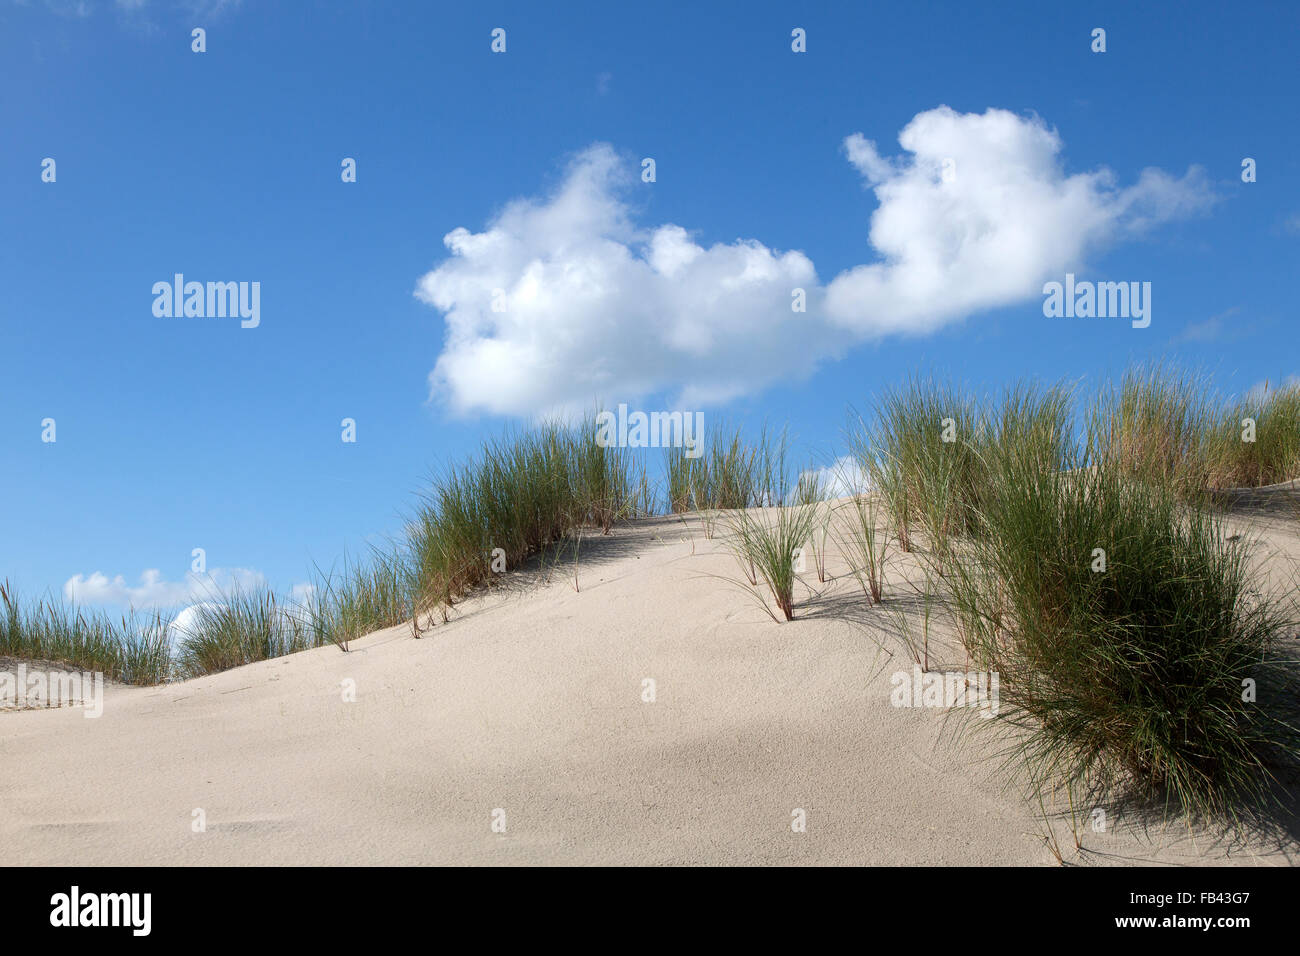 Sandy dune with European Marram Grass (Ammophila arenaria) on blue sky with fluffy white clouds Stock Photo